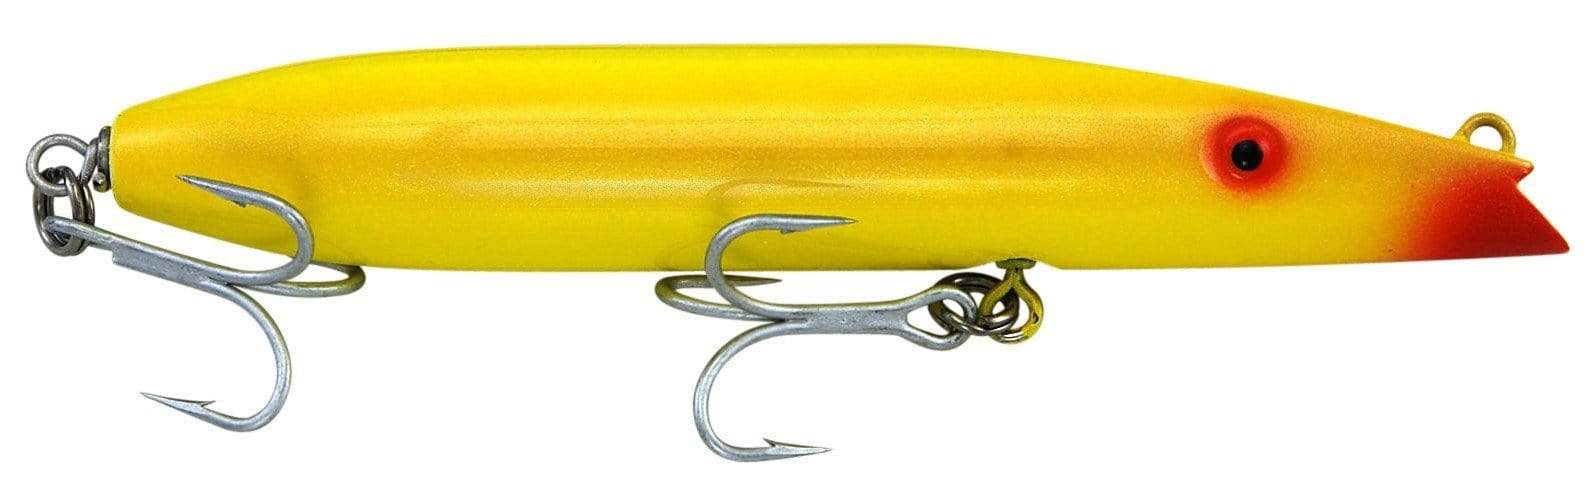 Top Lure Brands - The Saltwater Edge